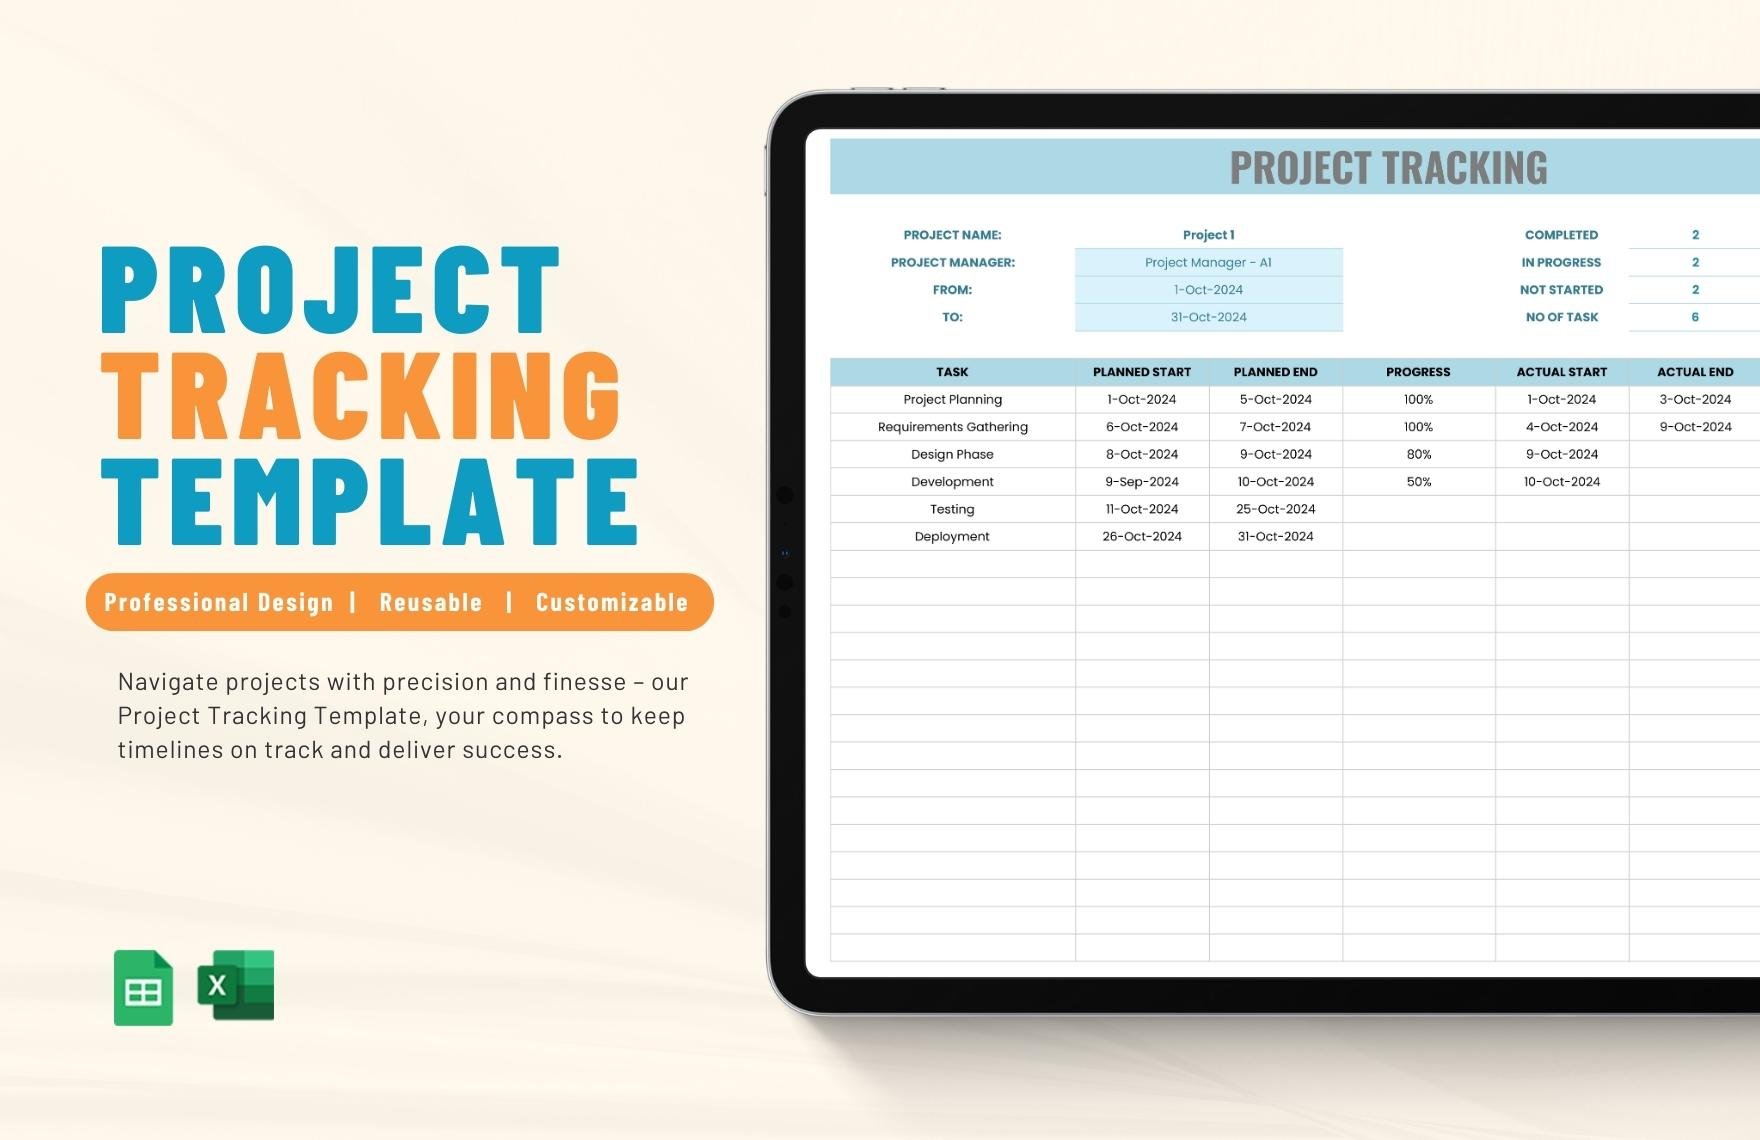 Project Tracking Template